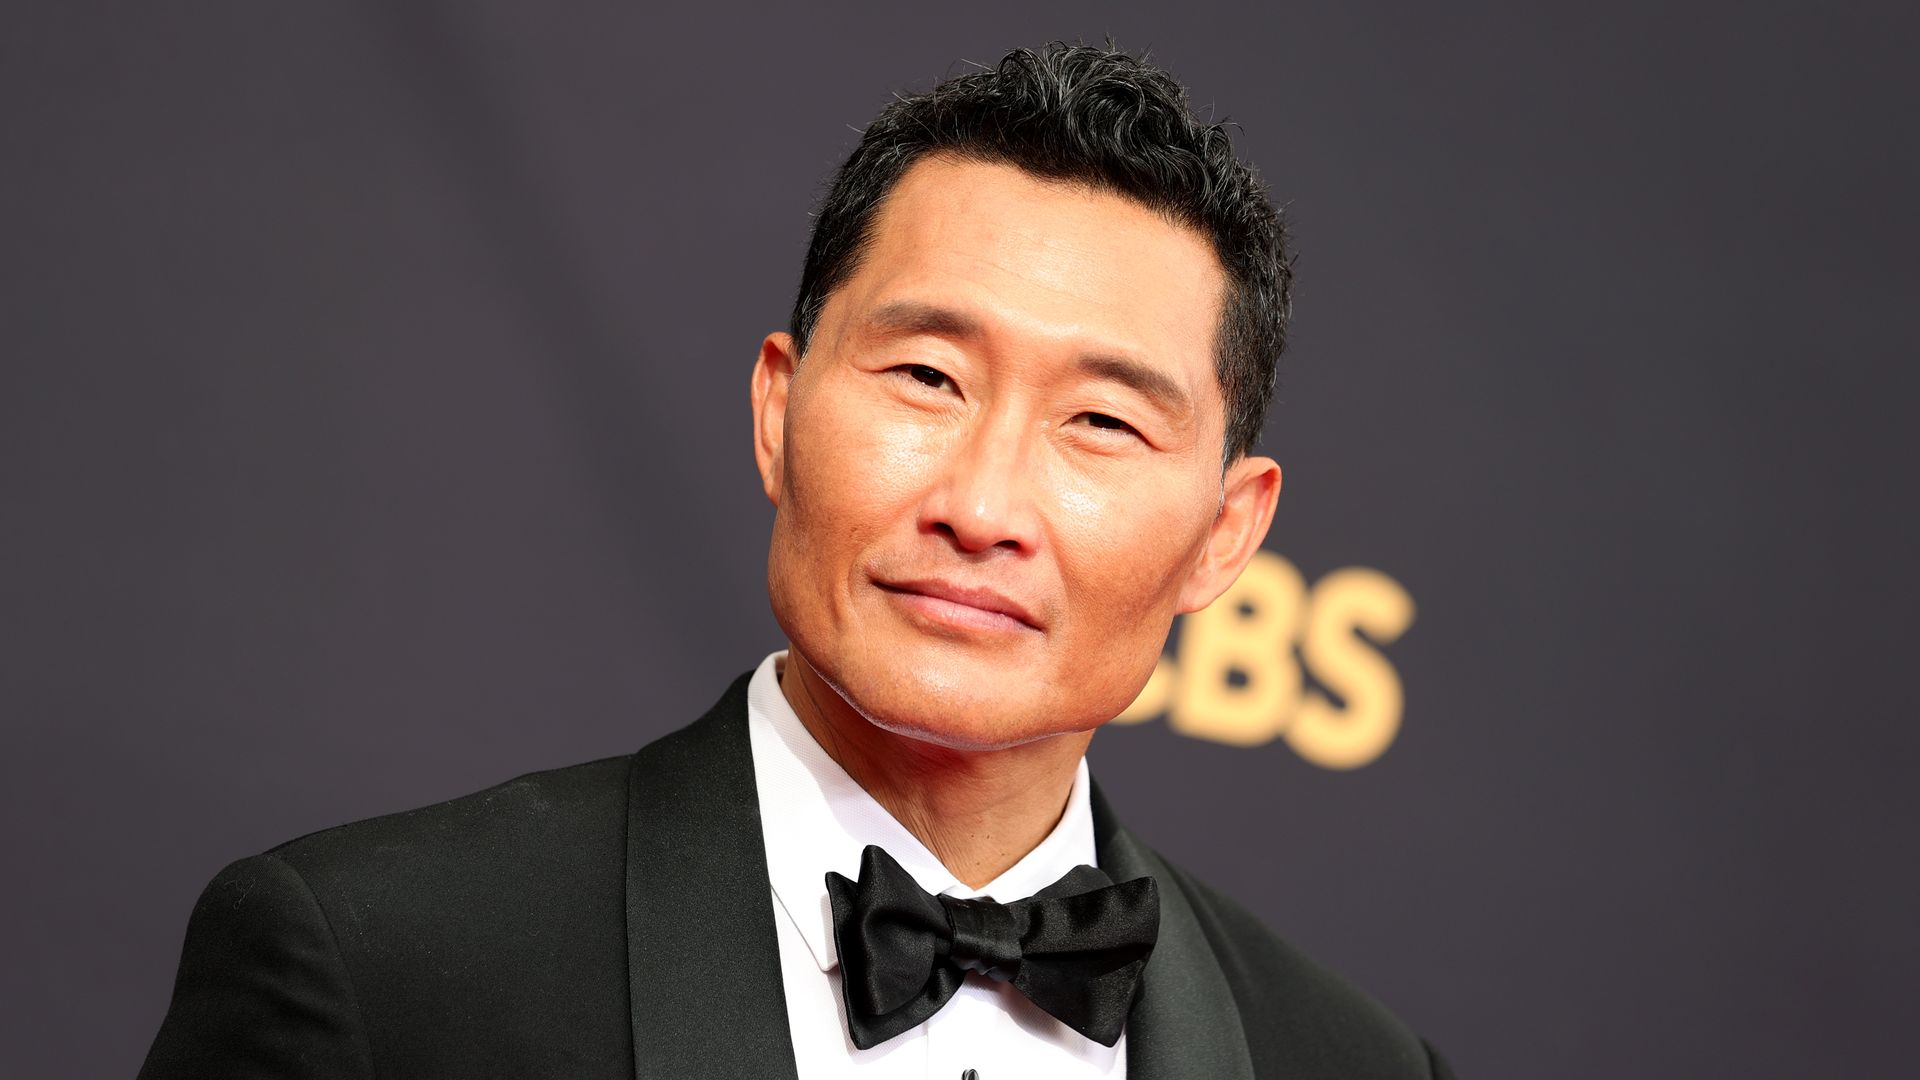  Daniel Dae Kim attends the 73rd Primetime Emmy Awards at L.A. LIVE on September 19, 2021 in Los Angeles, California. 